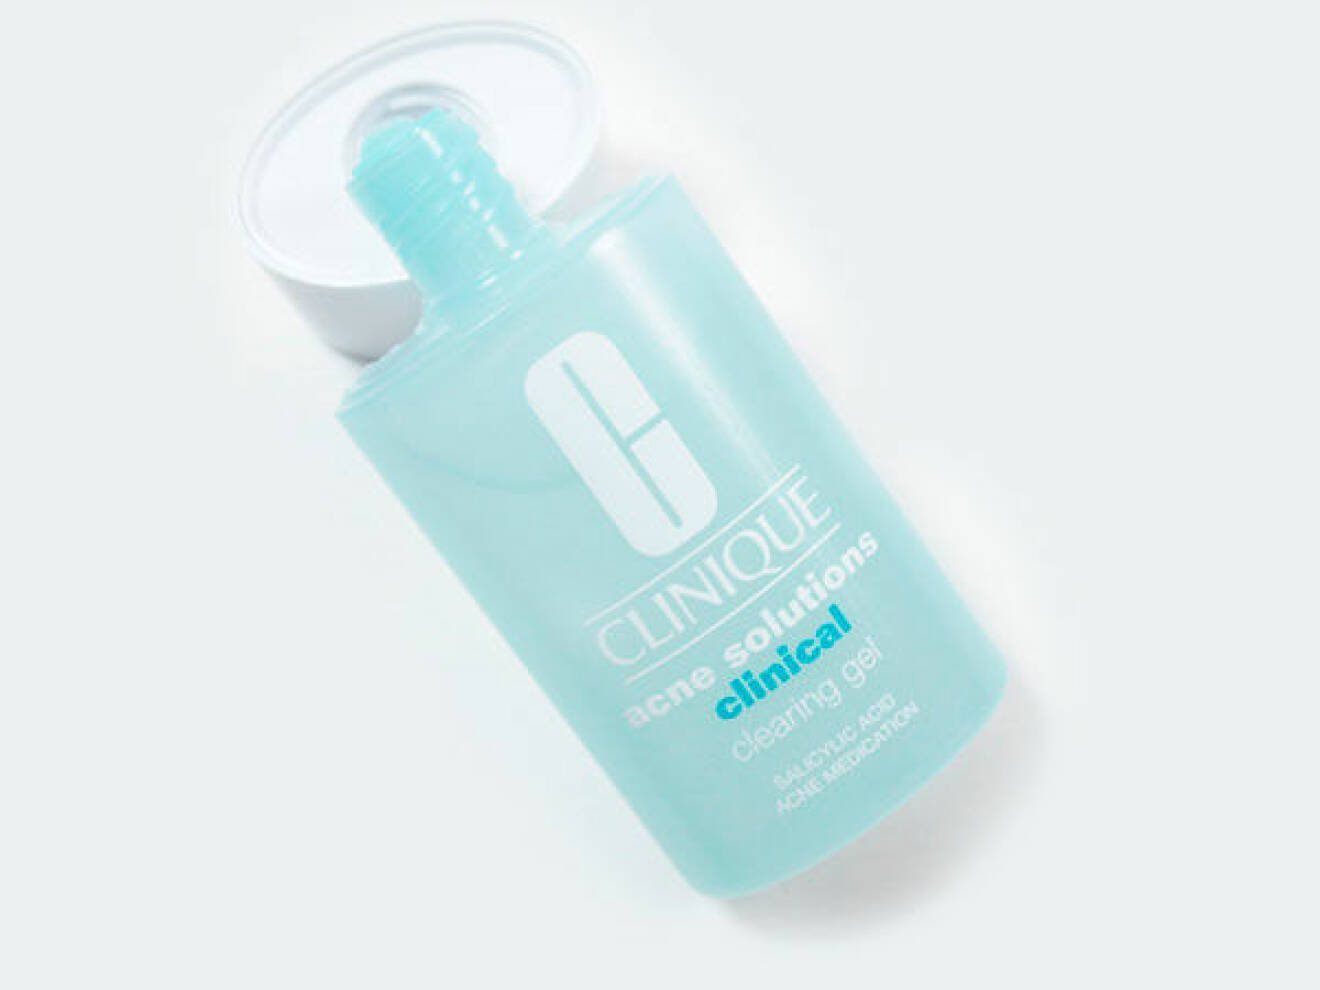 Anti-Blemish Solutions Clinical Clearing Gel, ca 265 kr, Clinique.